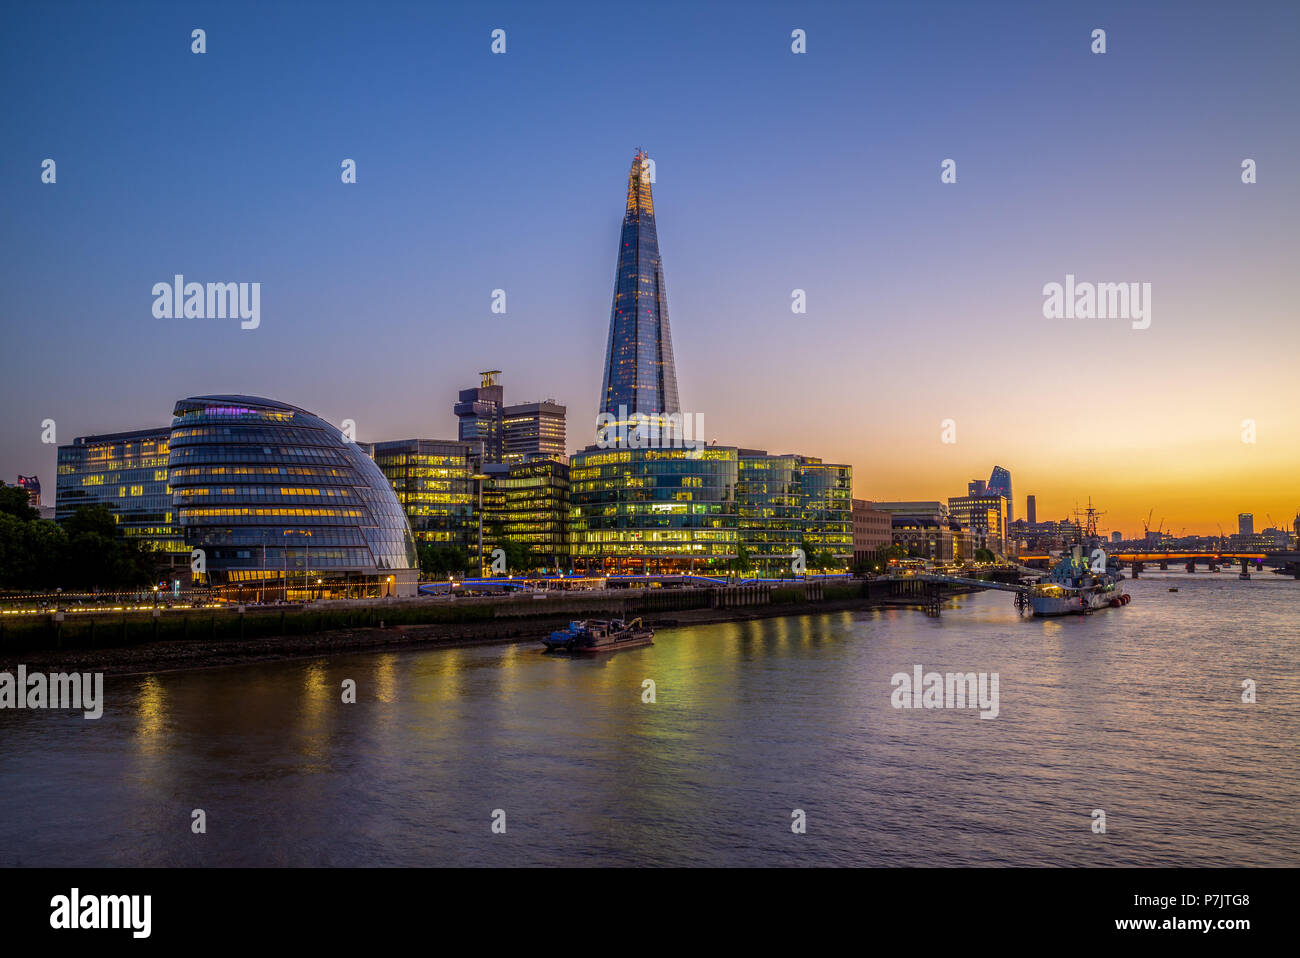 night view of london by the thames river Stock Photo